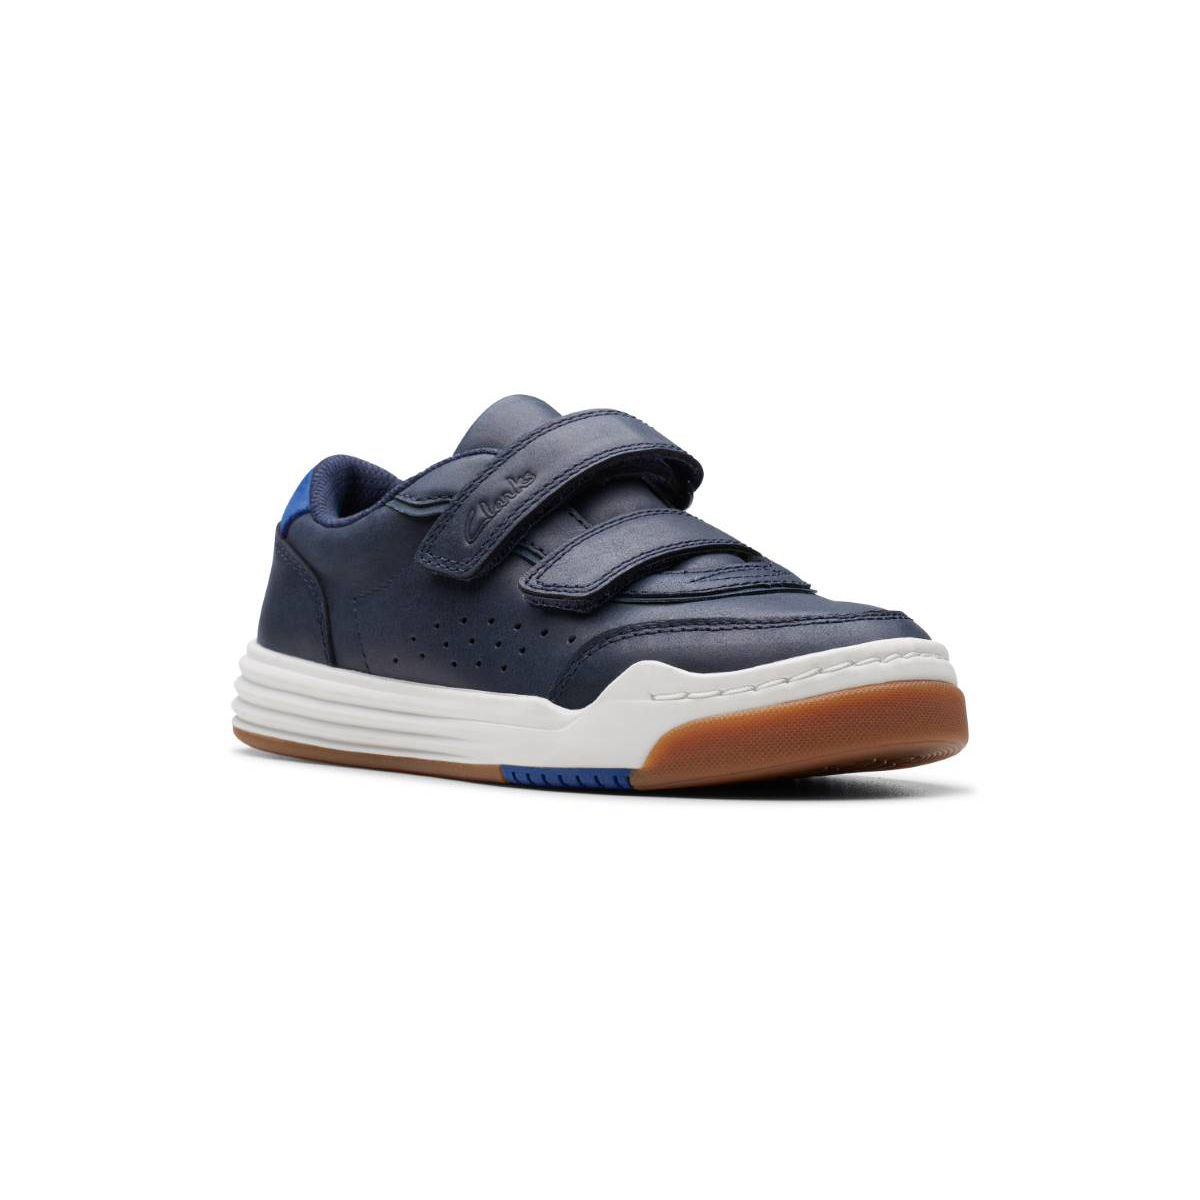 Clarks Urban Solo K Navy Leather Kids Boys Toddler Shoes 7666-06F in a Plain Leather in Size 7